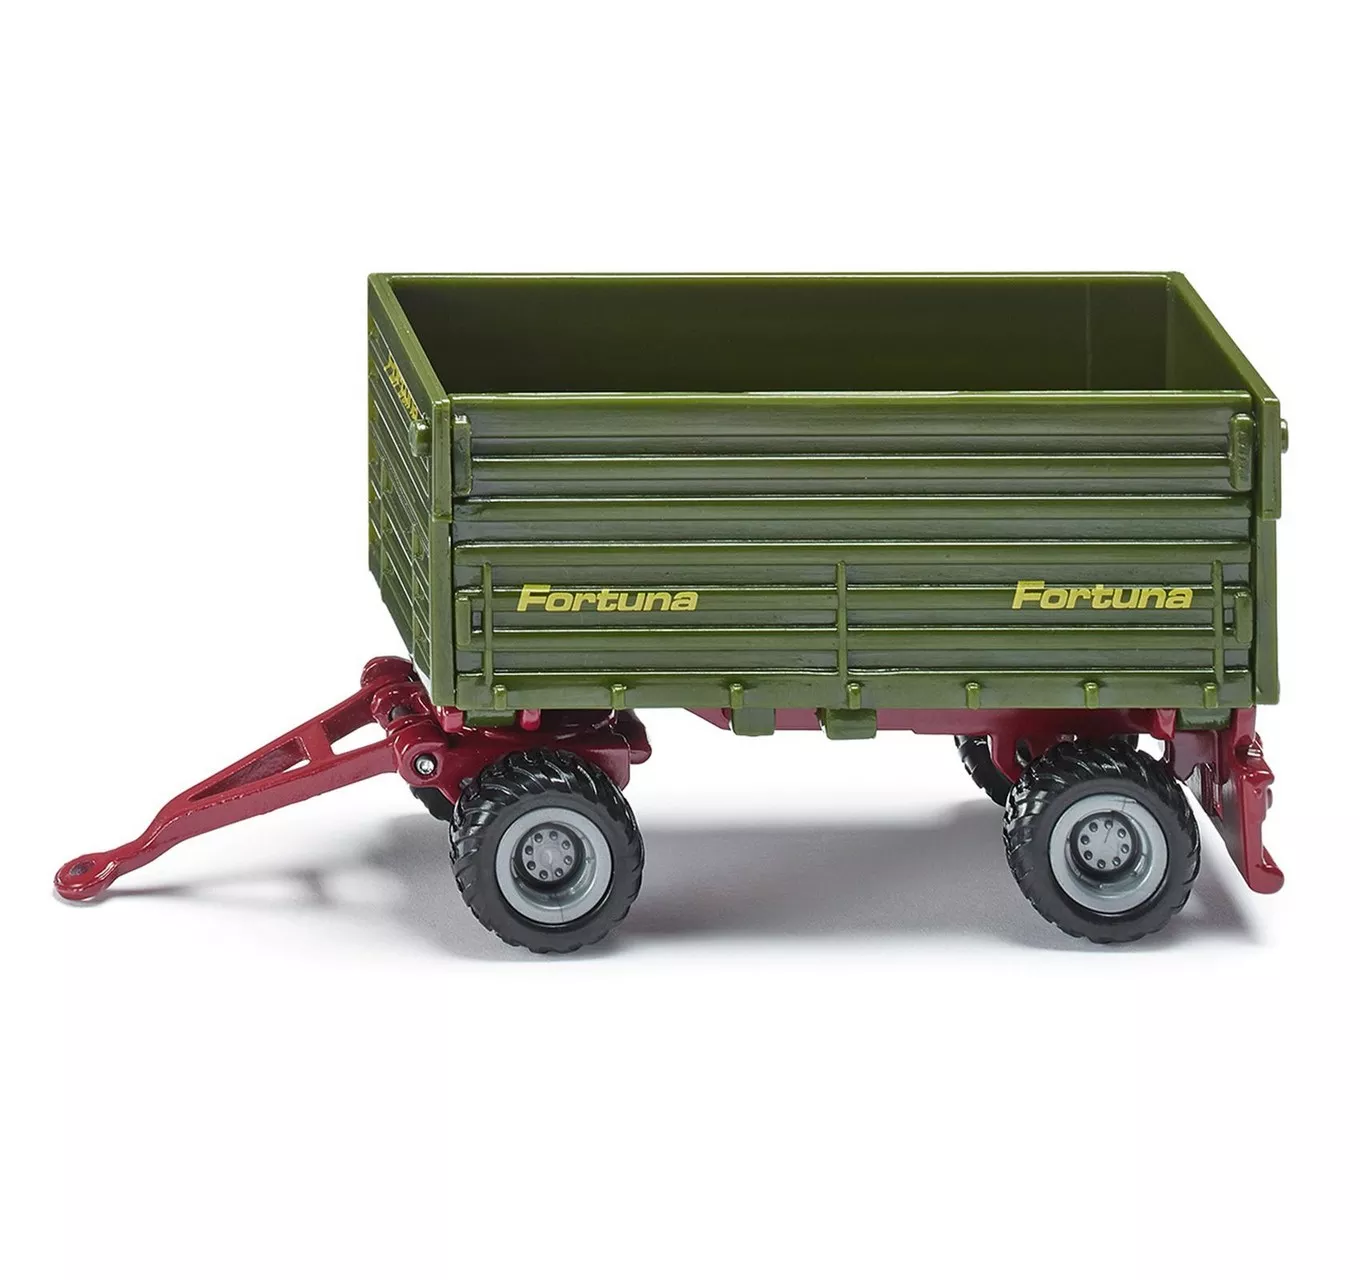 1:87 Two-Axled Fortuna Trailer